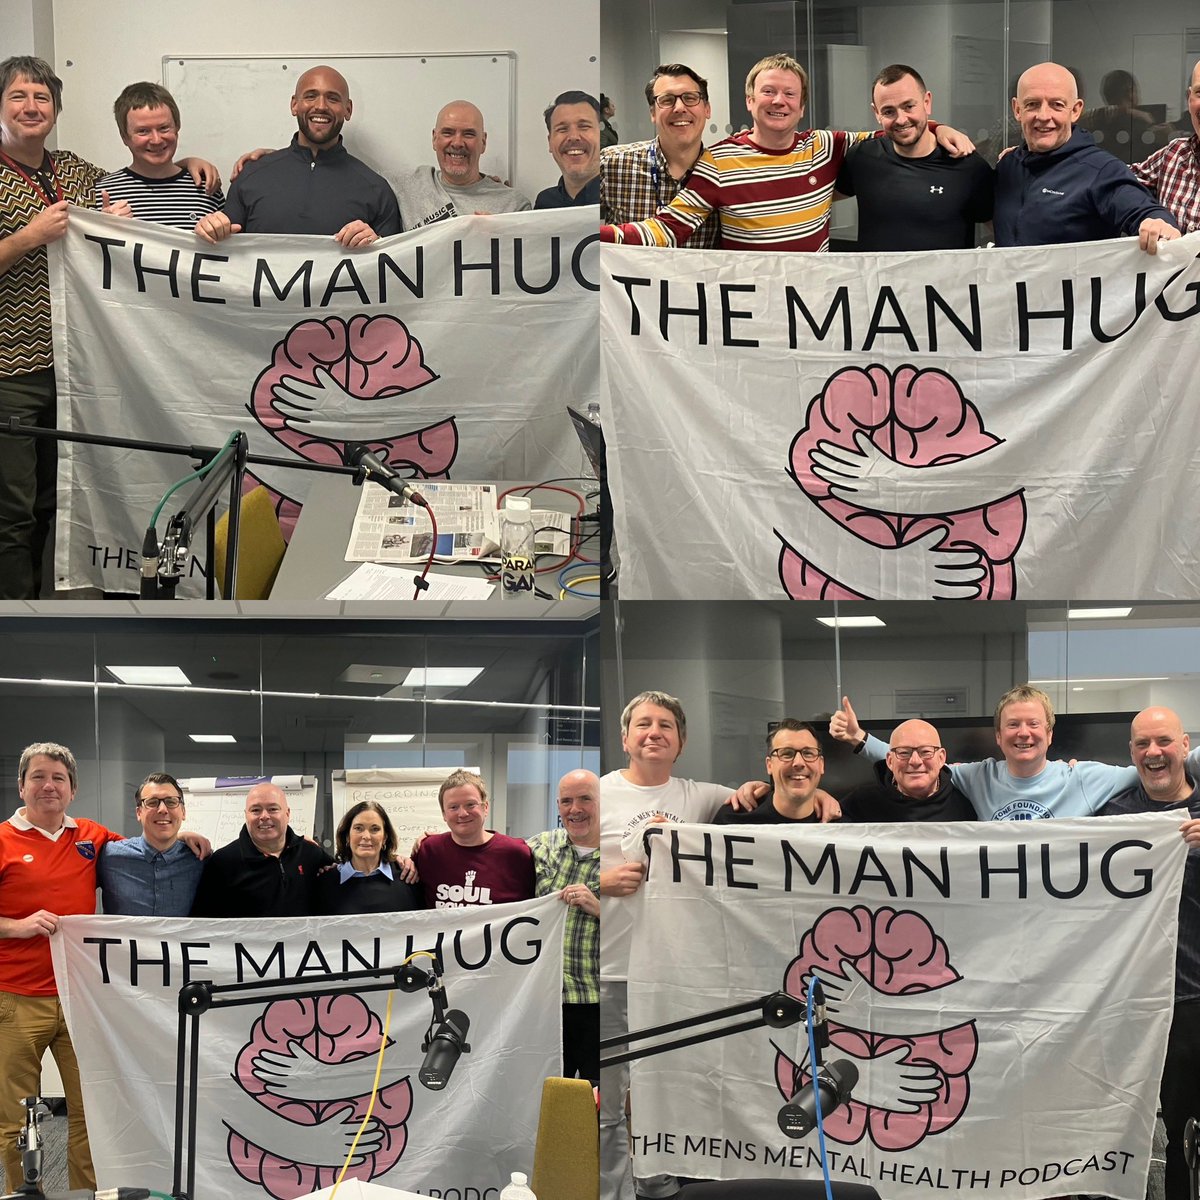 Happy birthday to us! The Man Hug has had the most amazing first year! All thanks to our incredible guests, the amazing charities and organizations we promote and you amazing listeners! Whose ready for year 2, it’s gonna be boss 💚🧠💚🧠